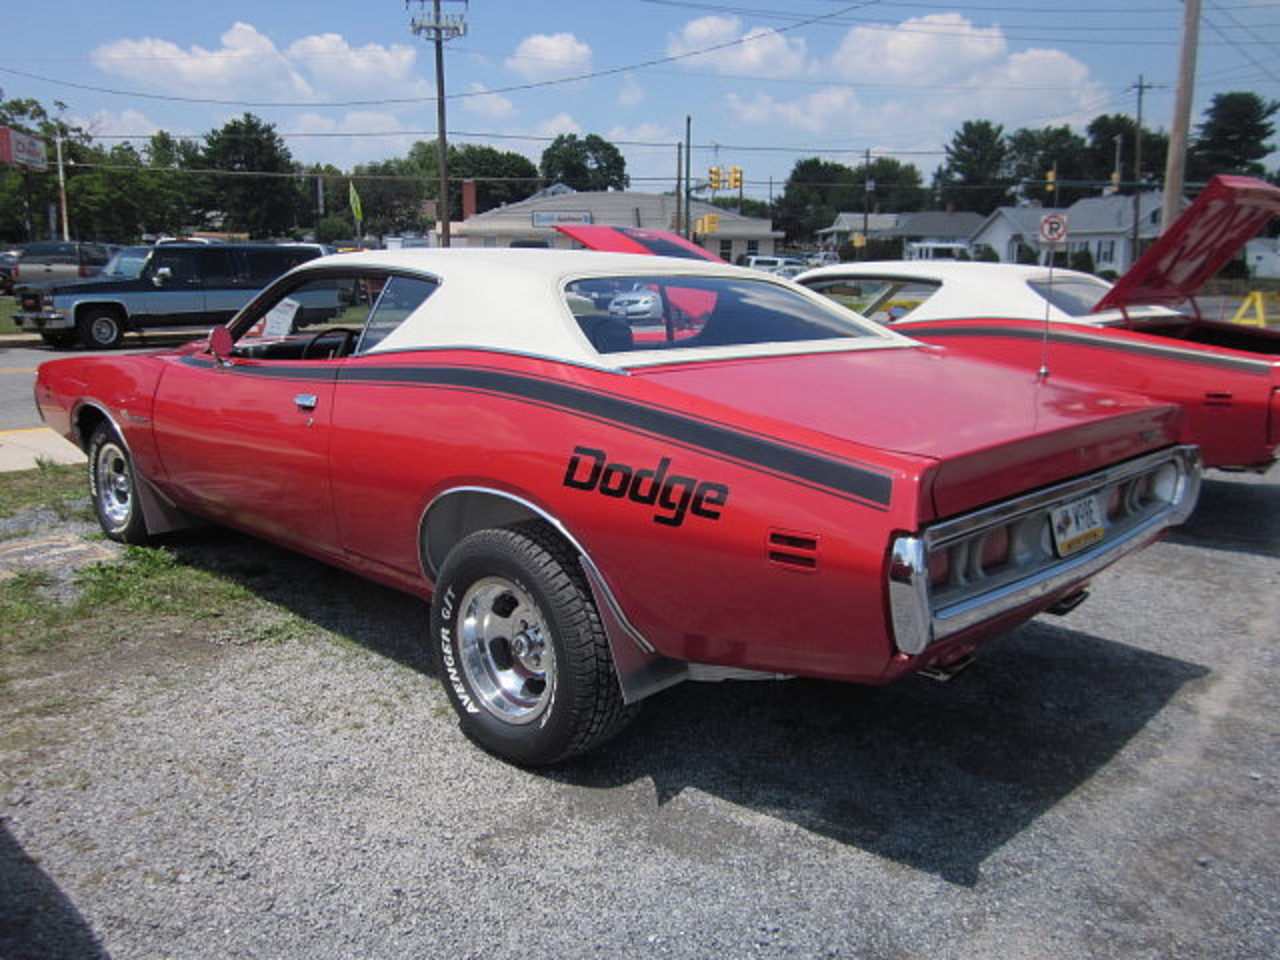 1971 Dodge Charger Super Bee | Flickr - Photo Sharing!